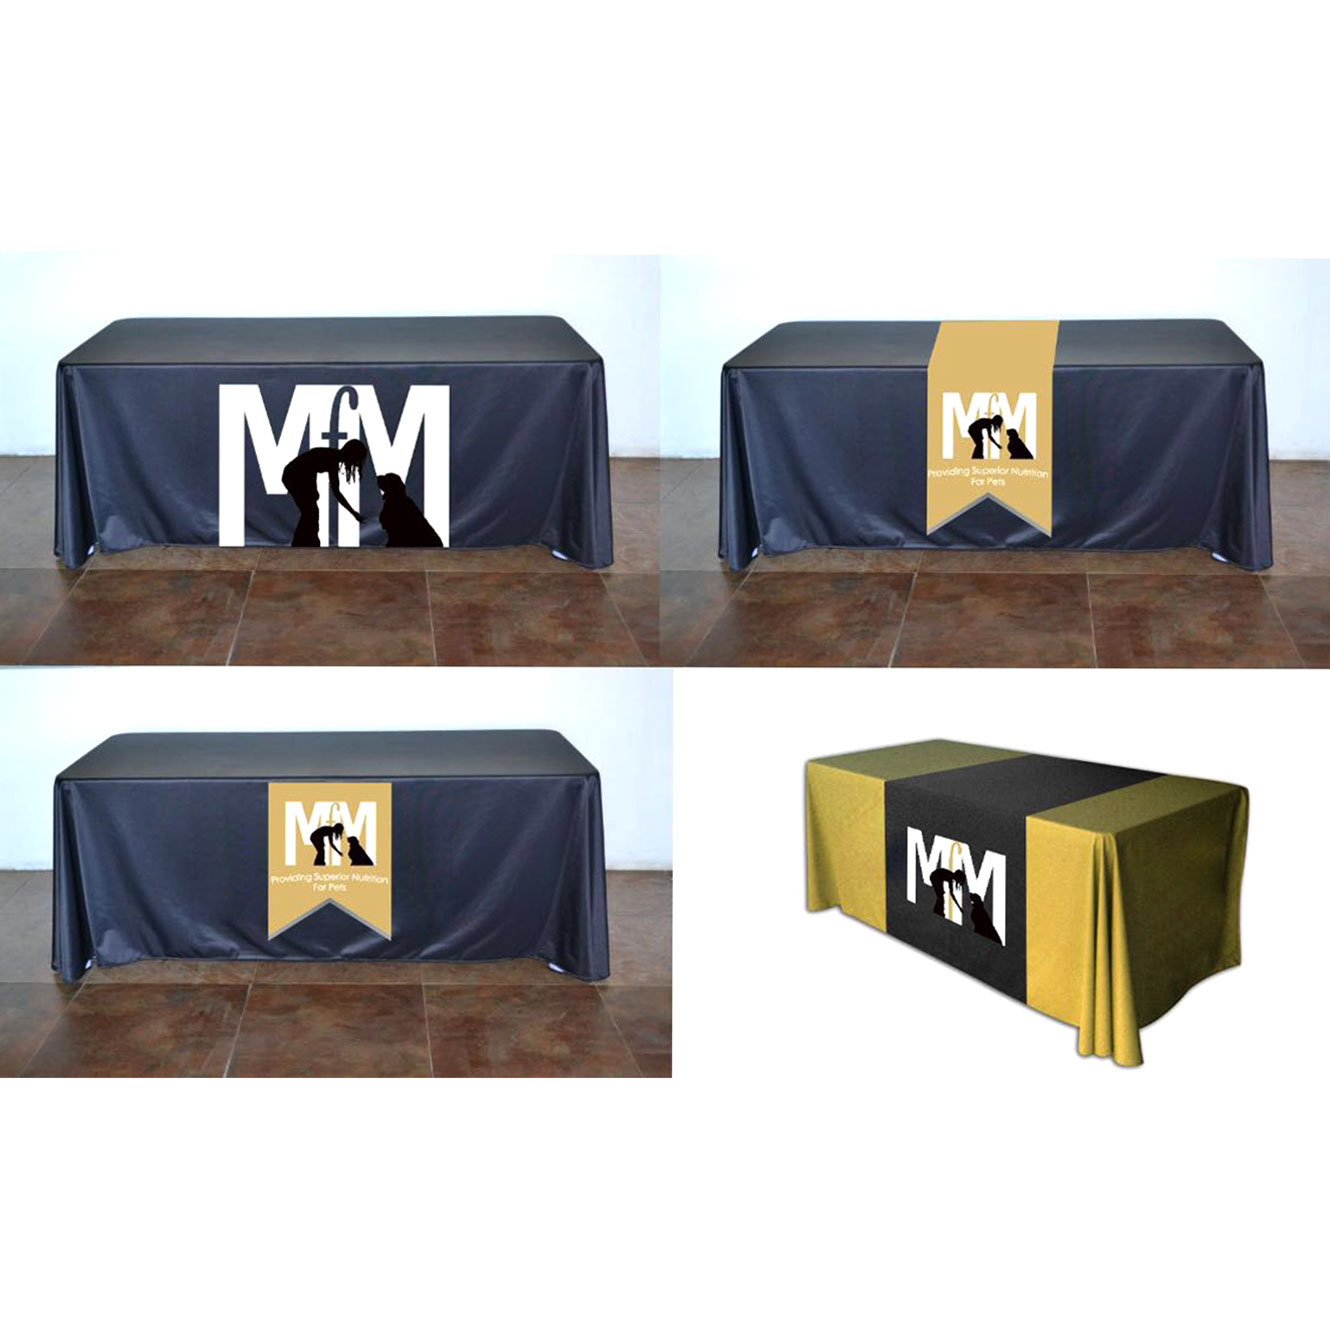 https://bigbanner.com.au/wp-content/uploads/2020/01/6ft-8ft-1-Sided-Deluxe-Printed-Fitted-Table-Throws-Covers-6.jpg